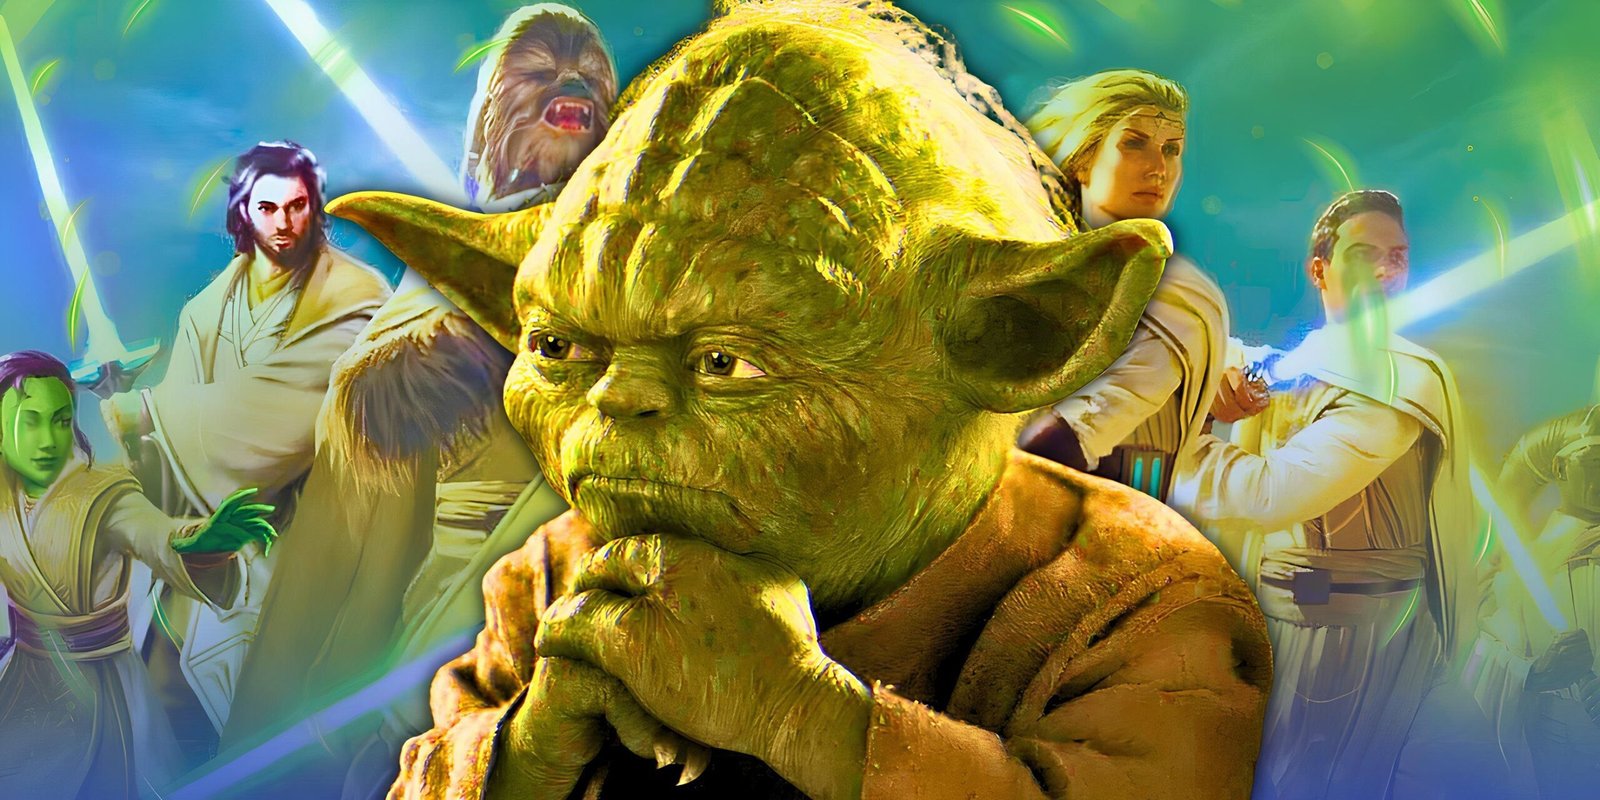 Star Wars Is Finally Confirming Yoda Wasn't To Blame For The Jedi's Fall